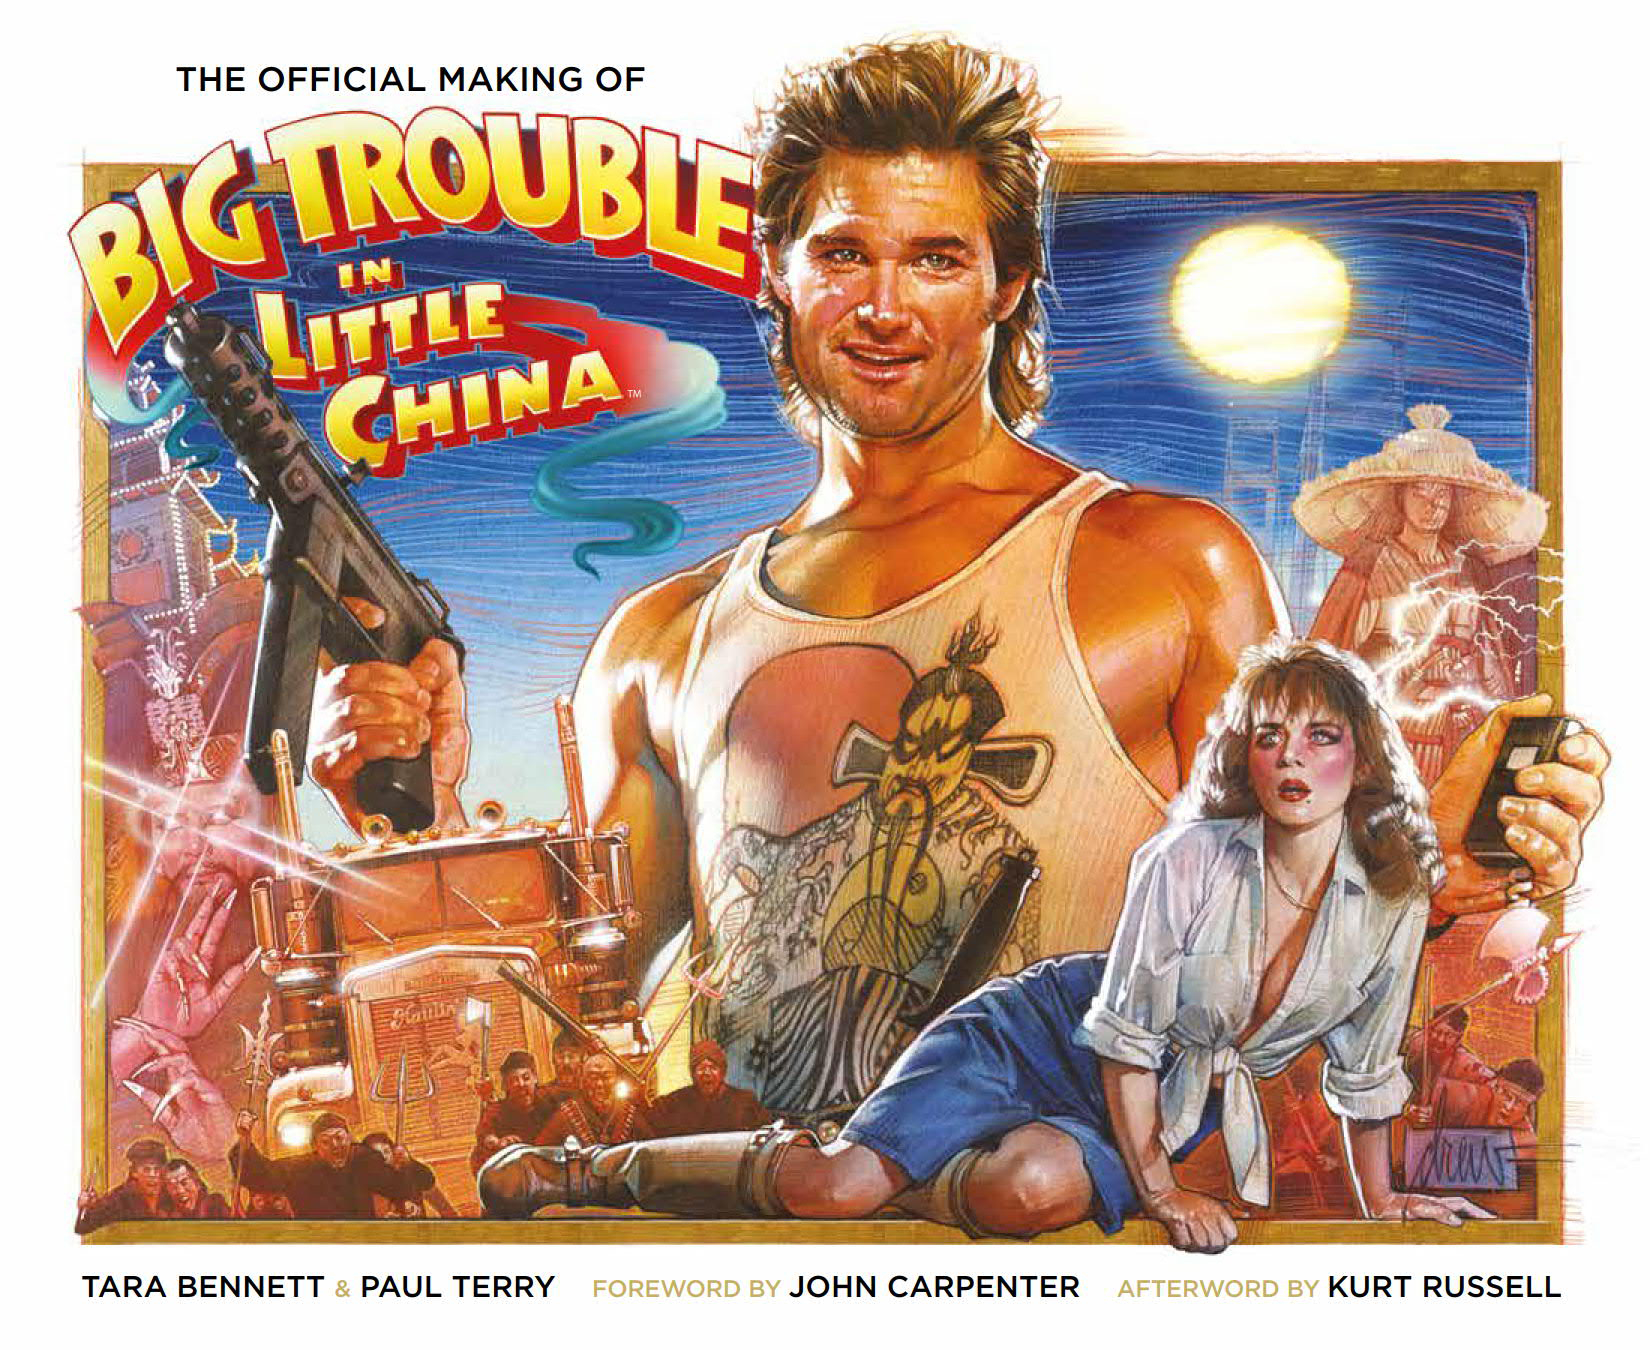 OFFICIAL MAKING OF BIG TROUBLE IN LITTLE CHINA HC